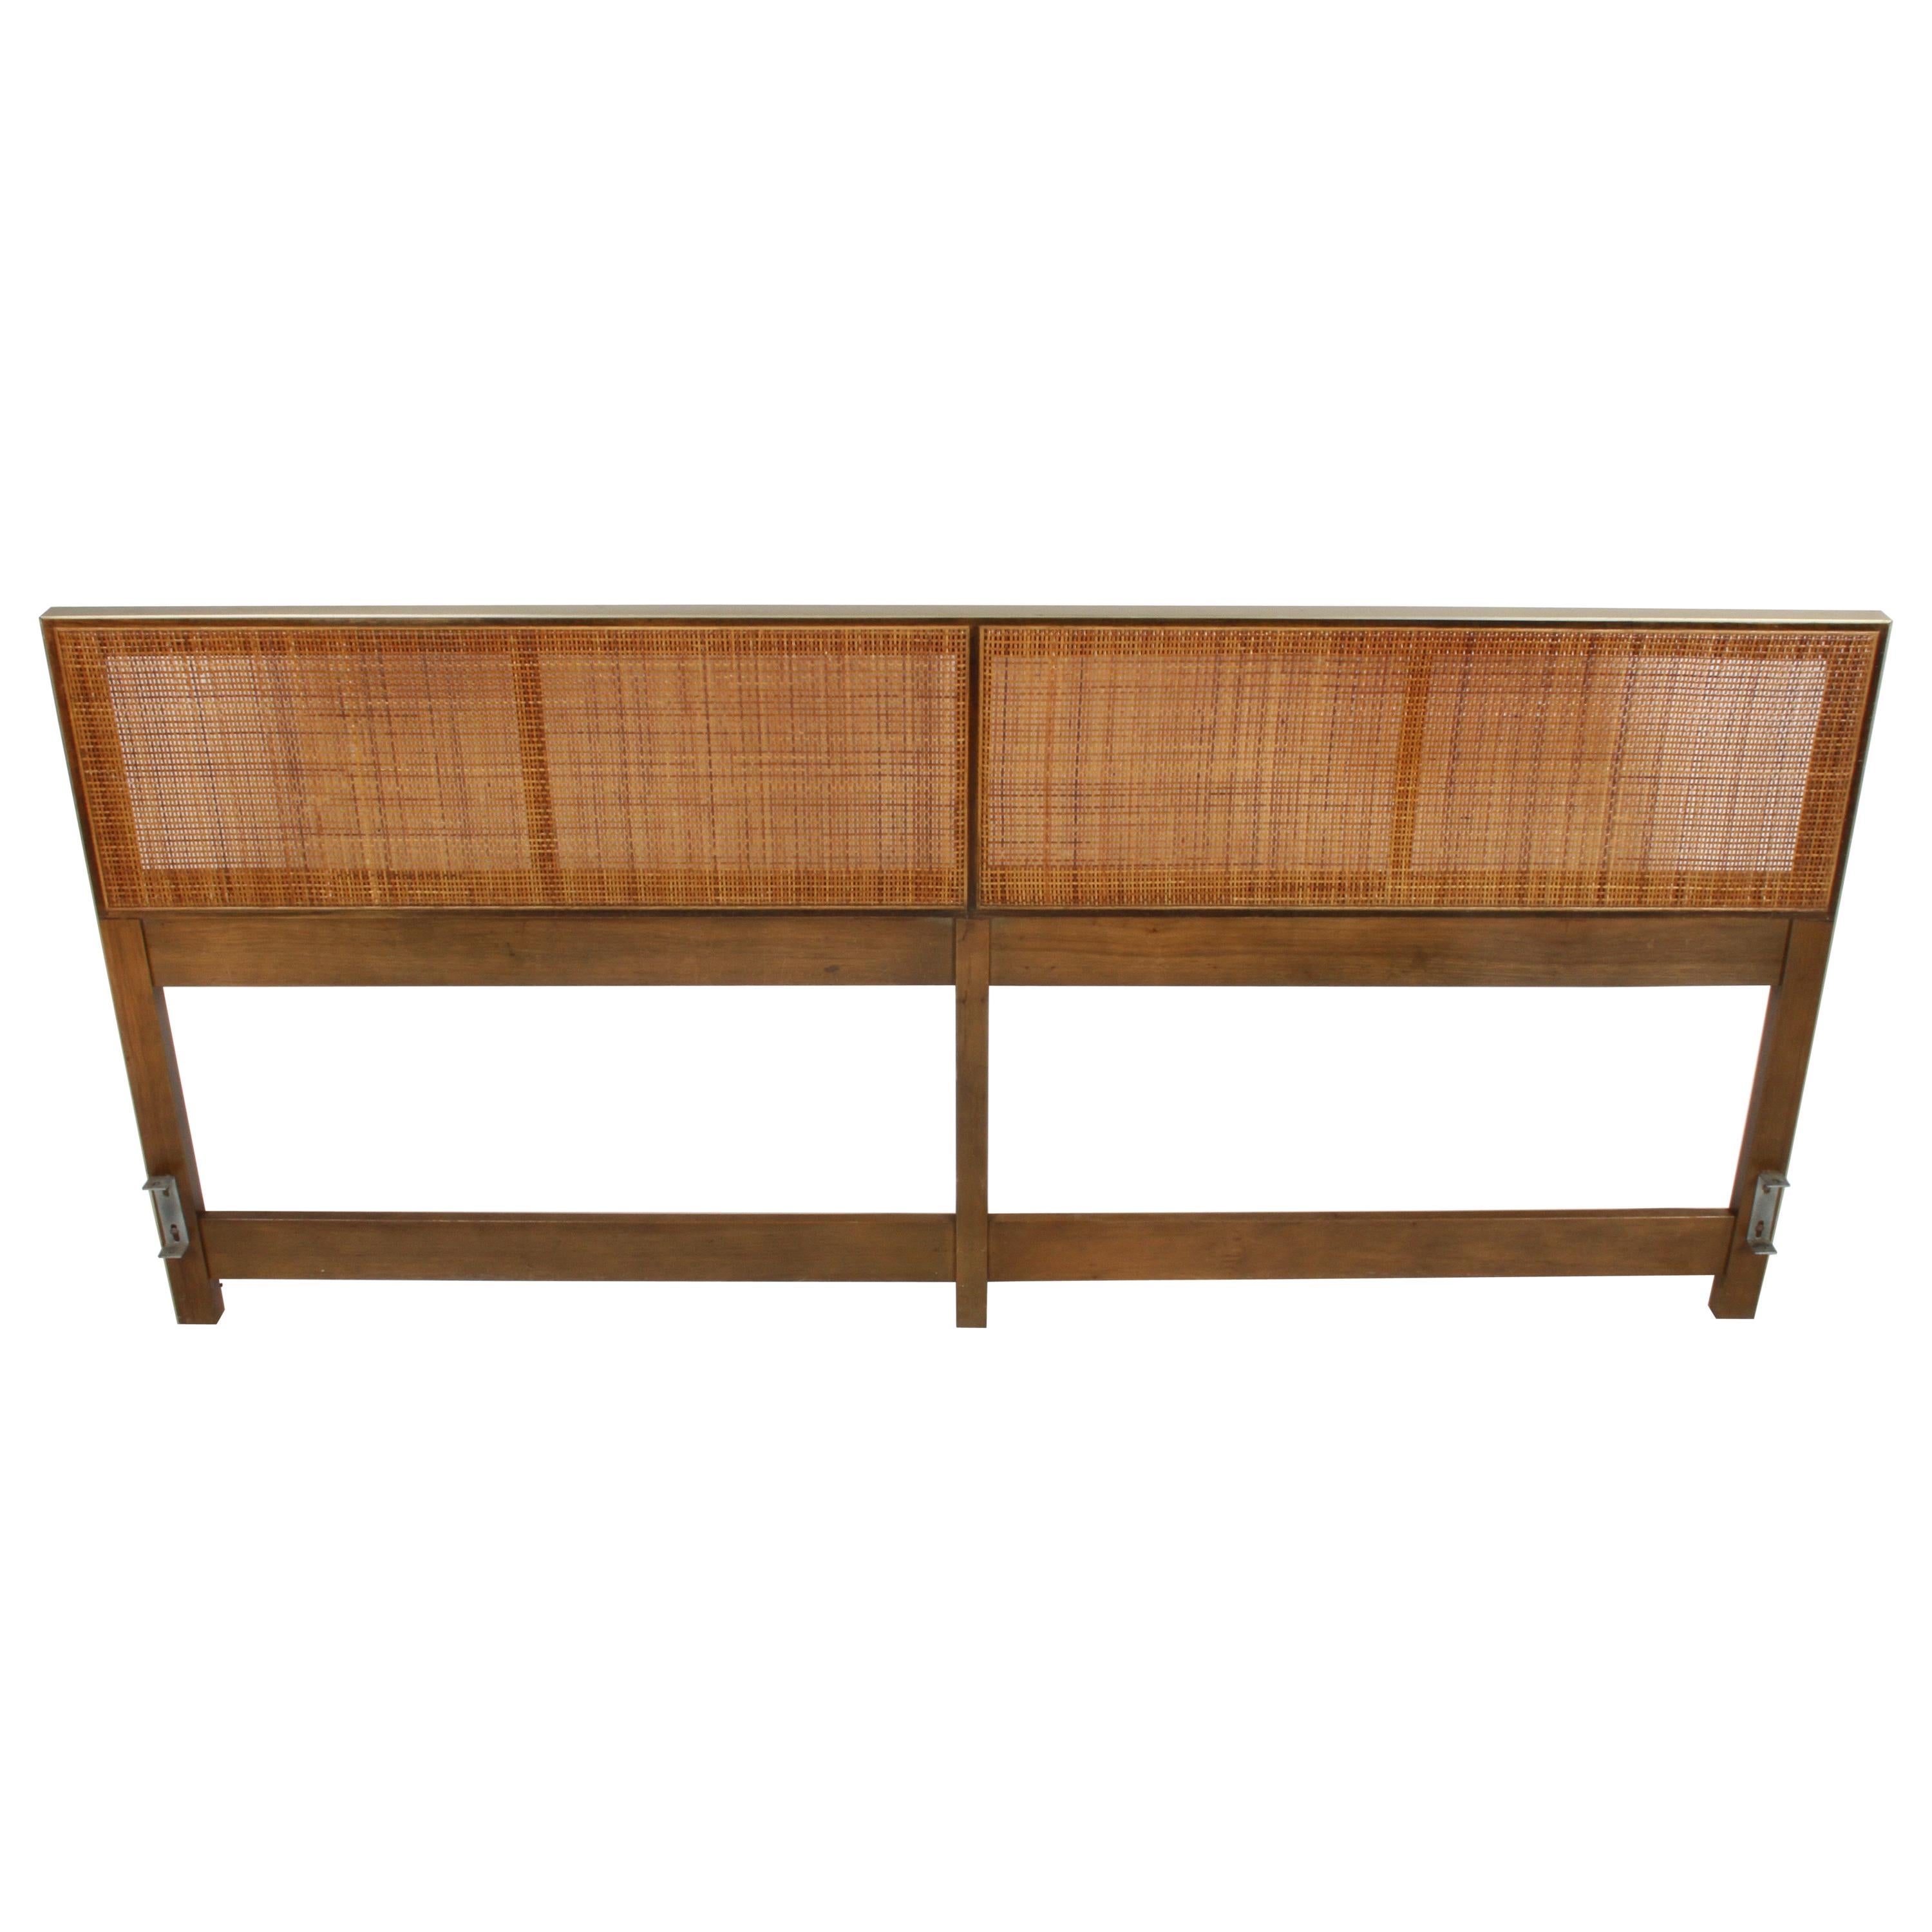 Paul McCobb King Headboard for Calvin with Caned Panels